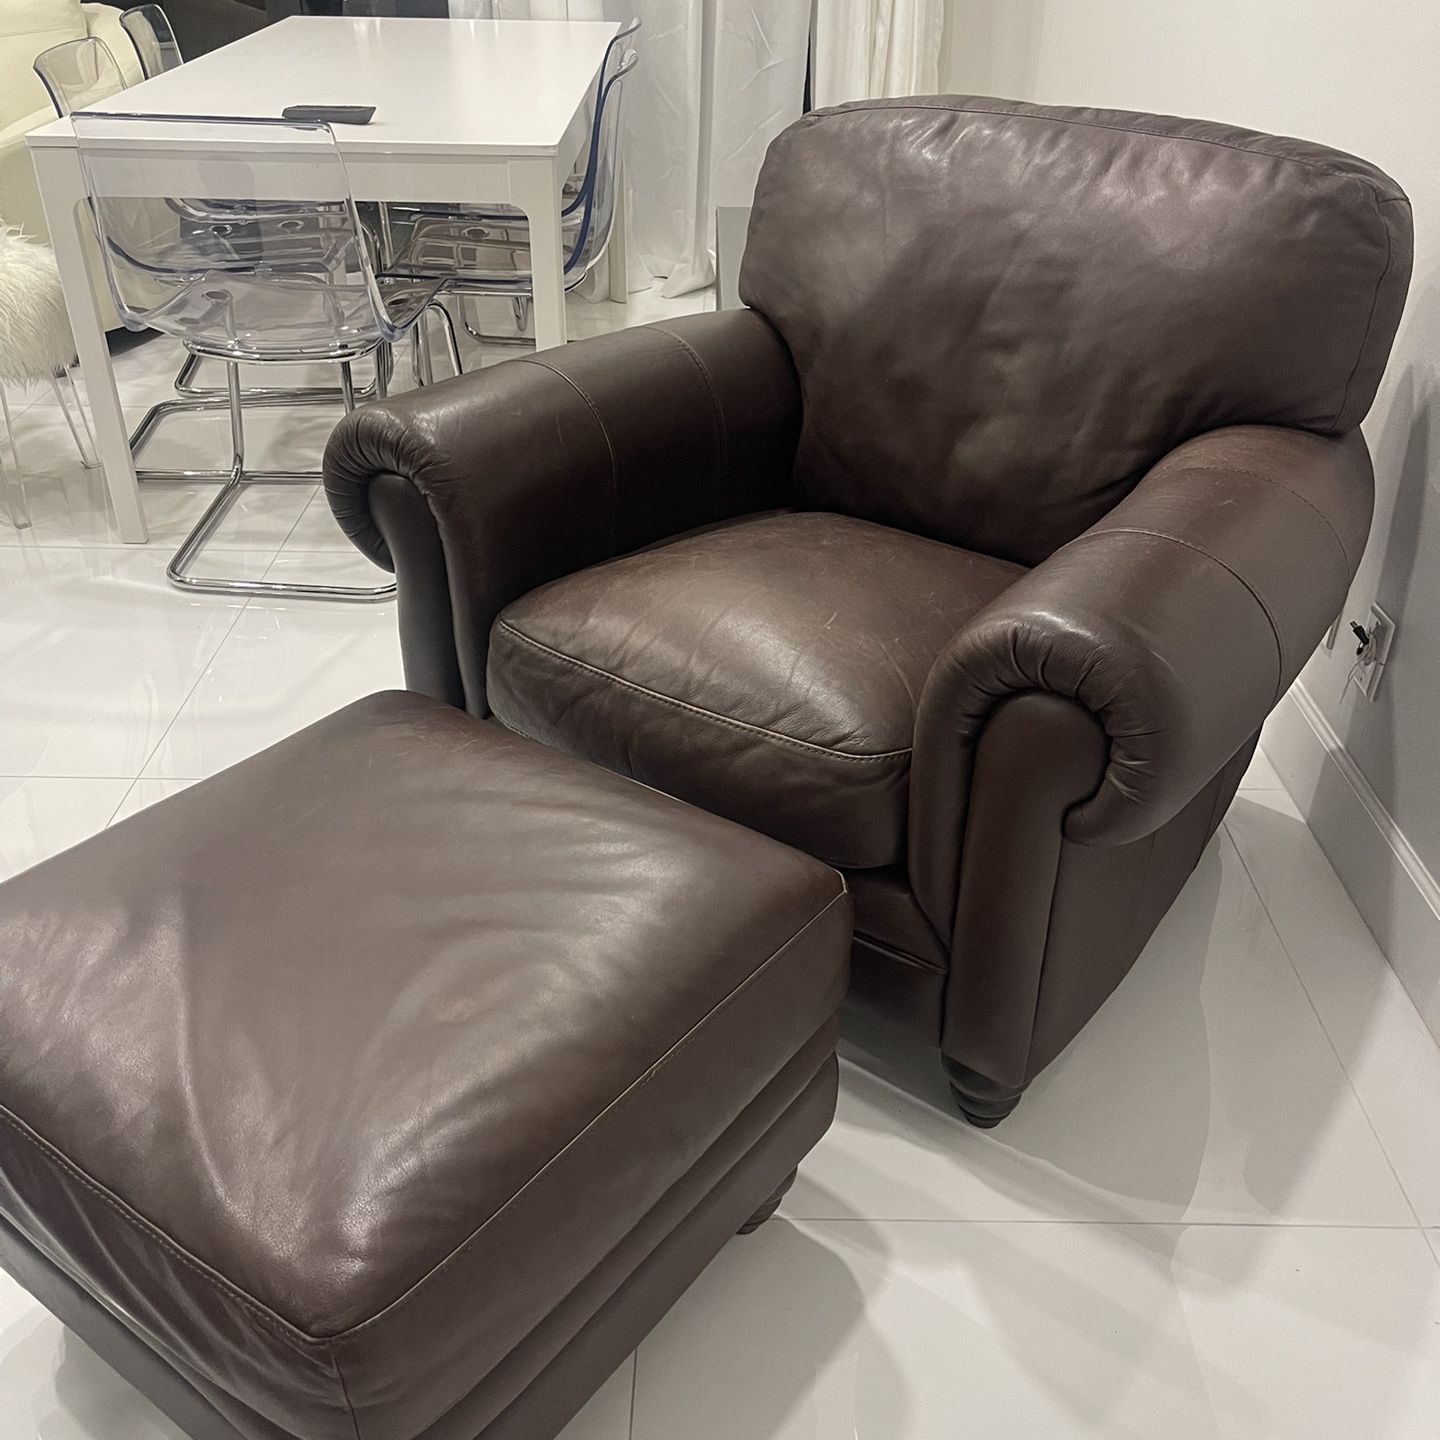 Beautiful Leather Chair & Ottoman - Great Condition - Originally $1599.   Asking $150